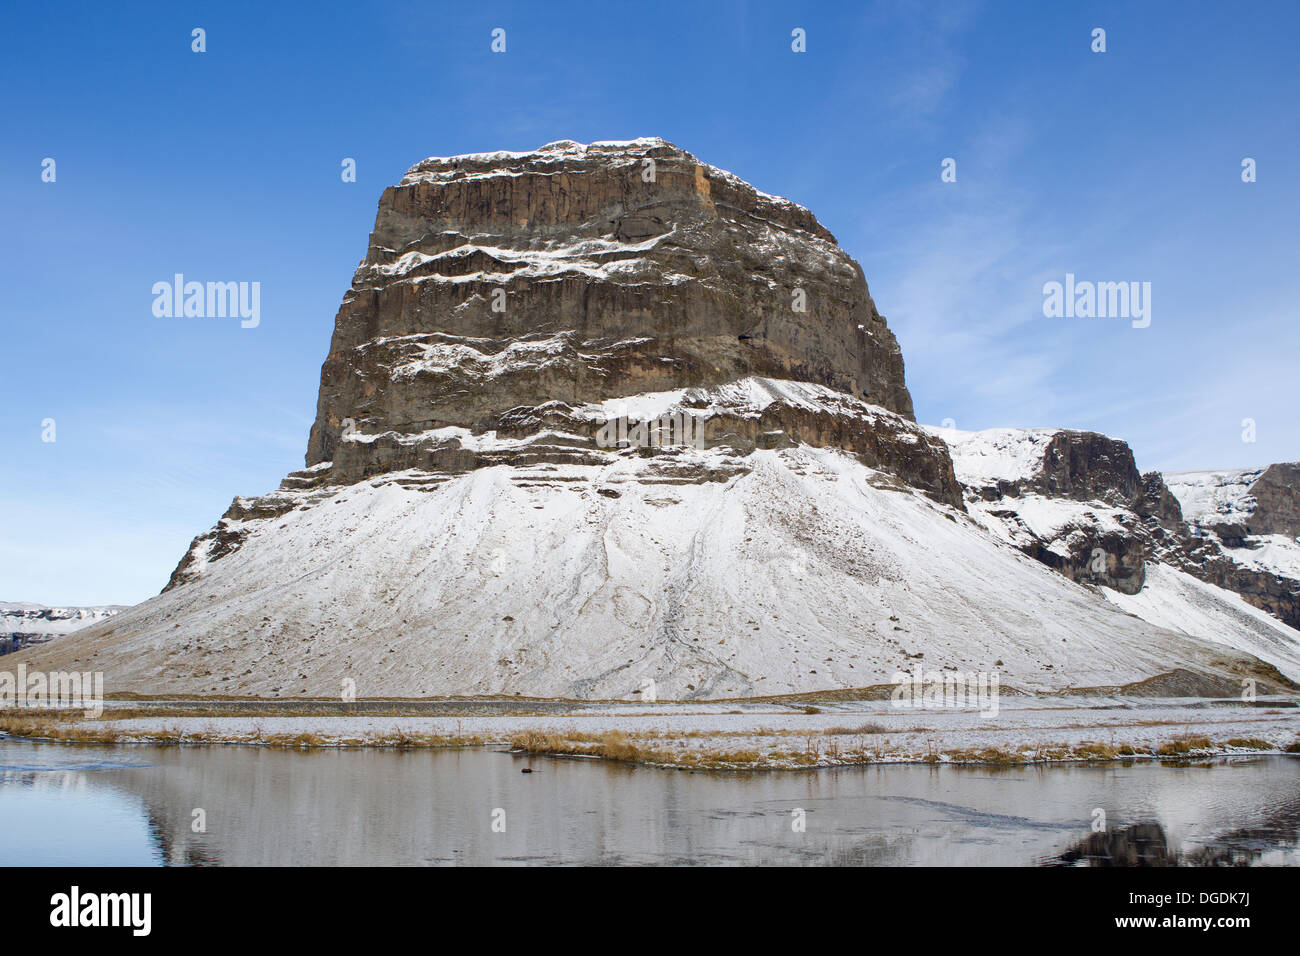 A snowy mountain in Iceland Stock Photo